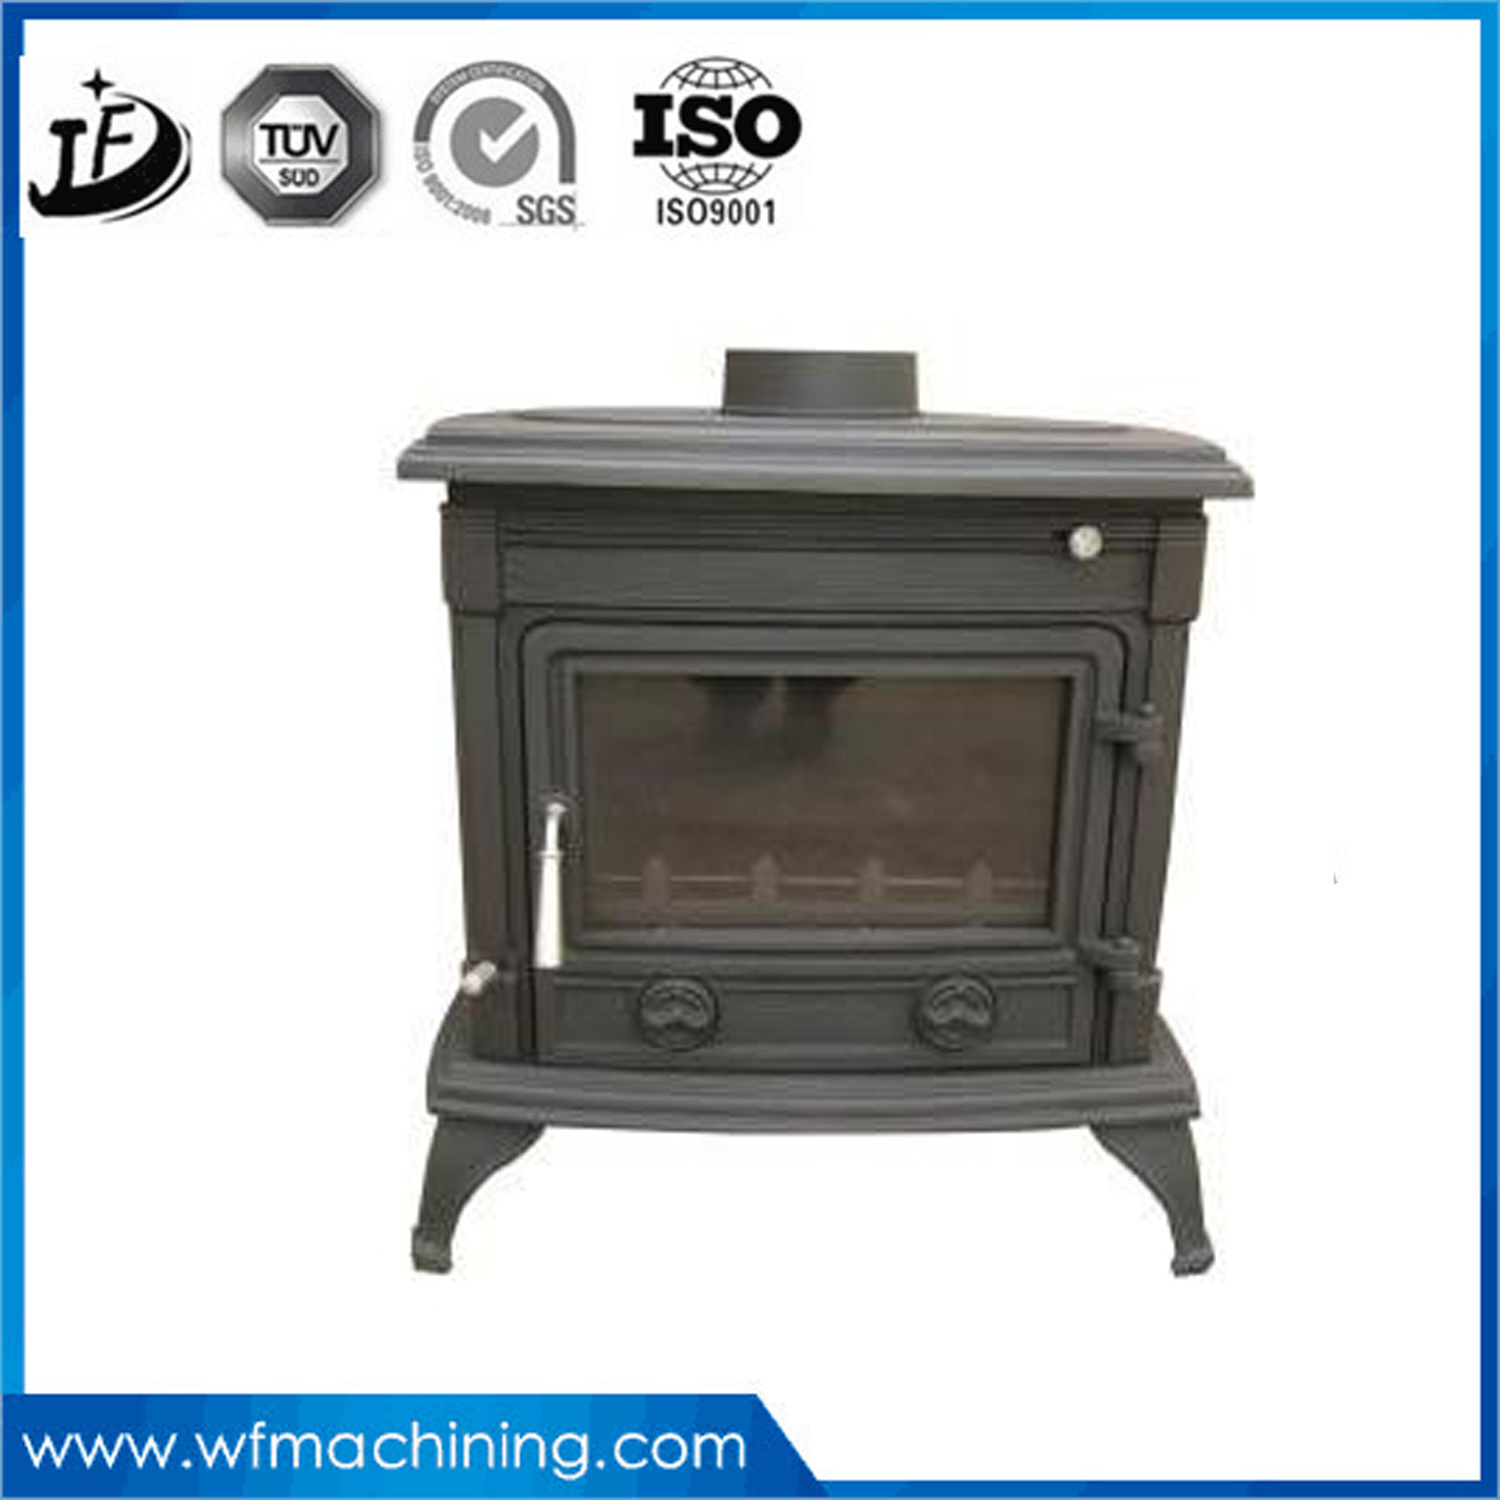 OEM Sand Casting Electric Fireplace of Home Moden Appliance